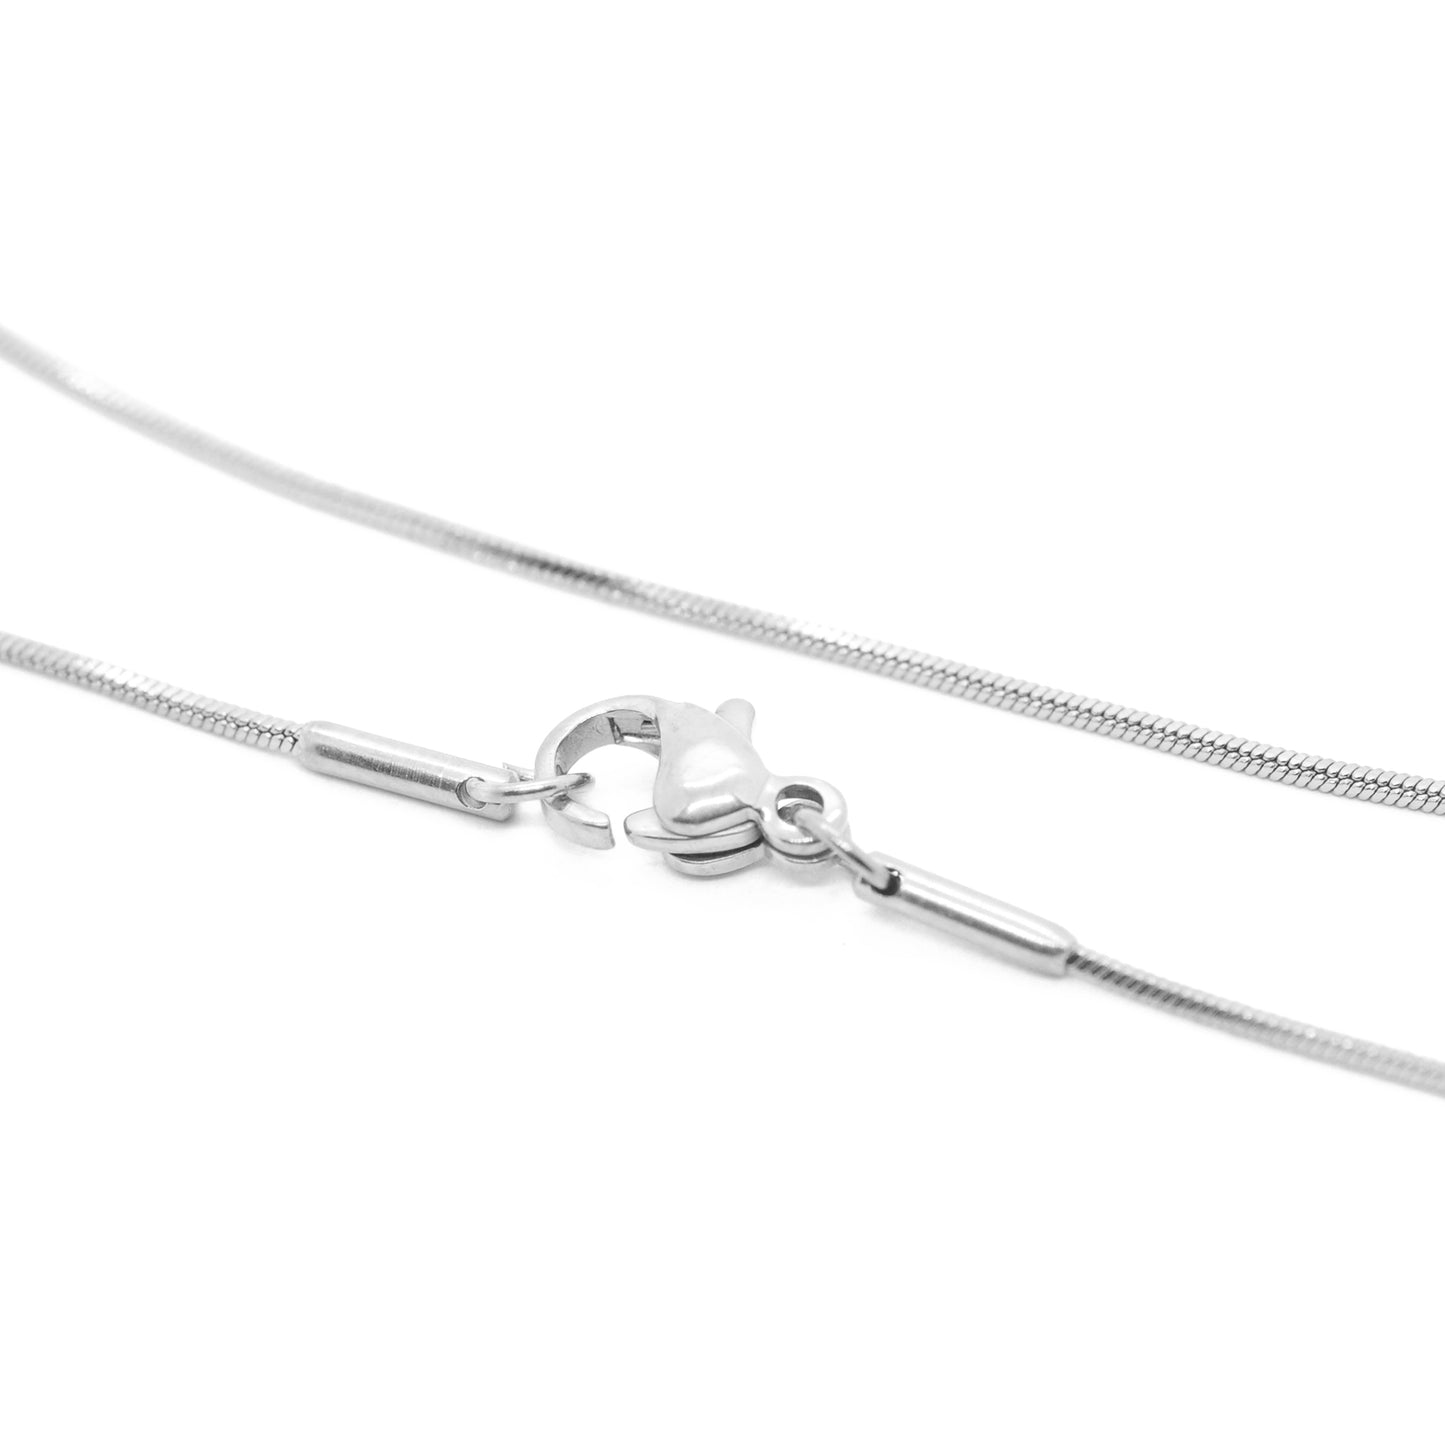 Stainless steel necklace snake chain / silver colored / 45 cm